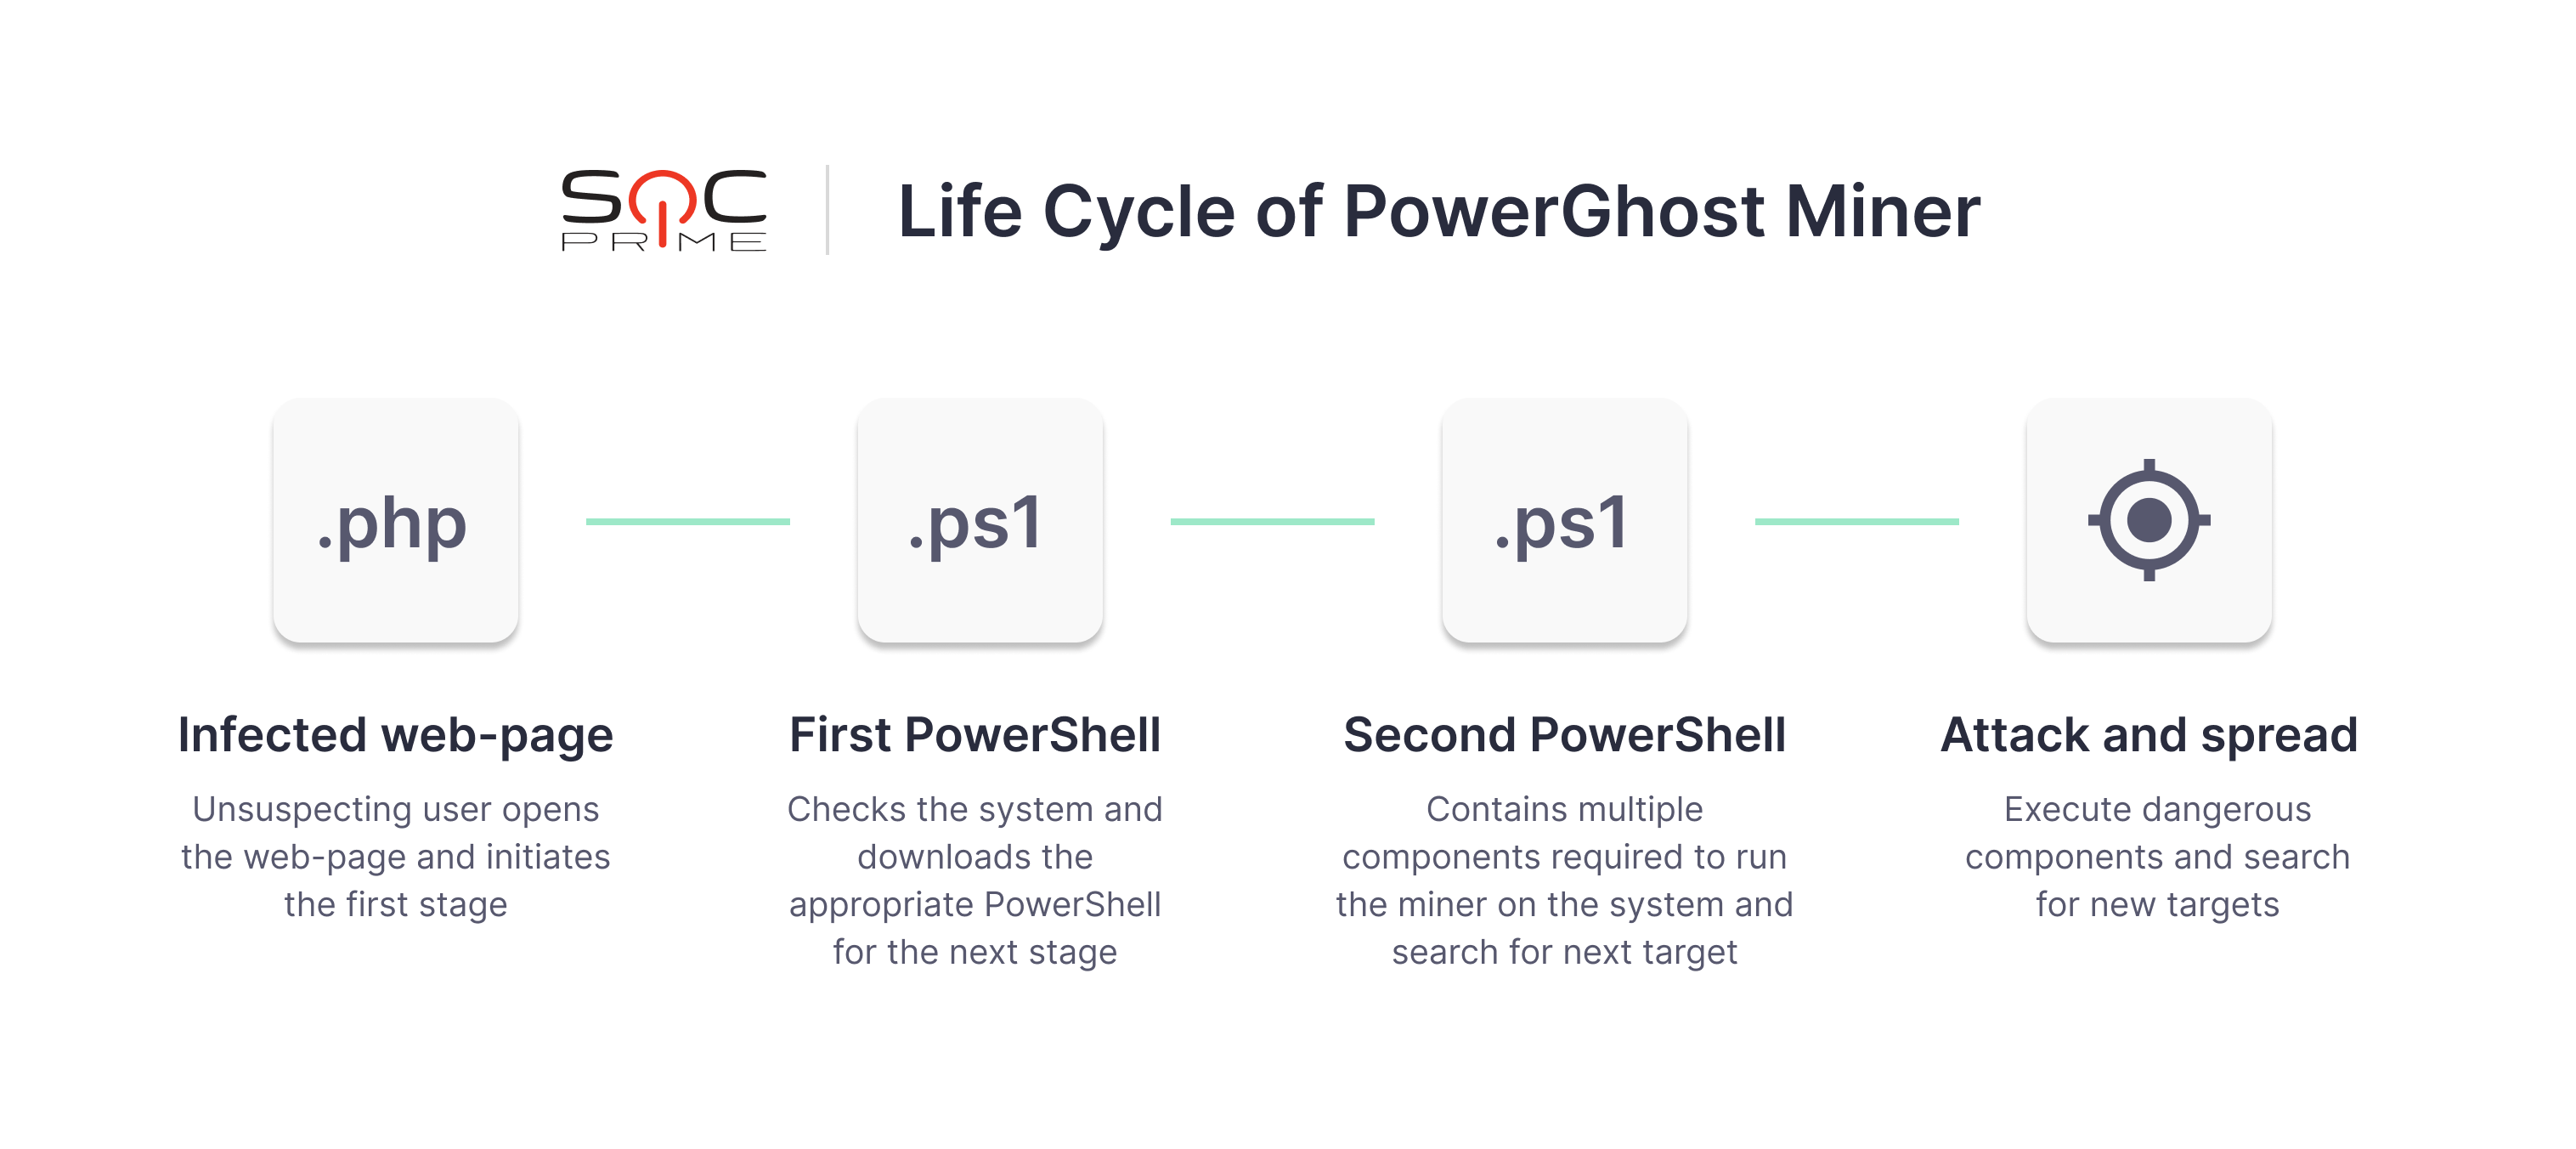 Life Cycle of PowerGhost Miner